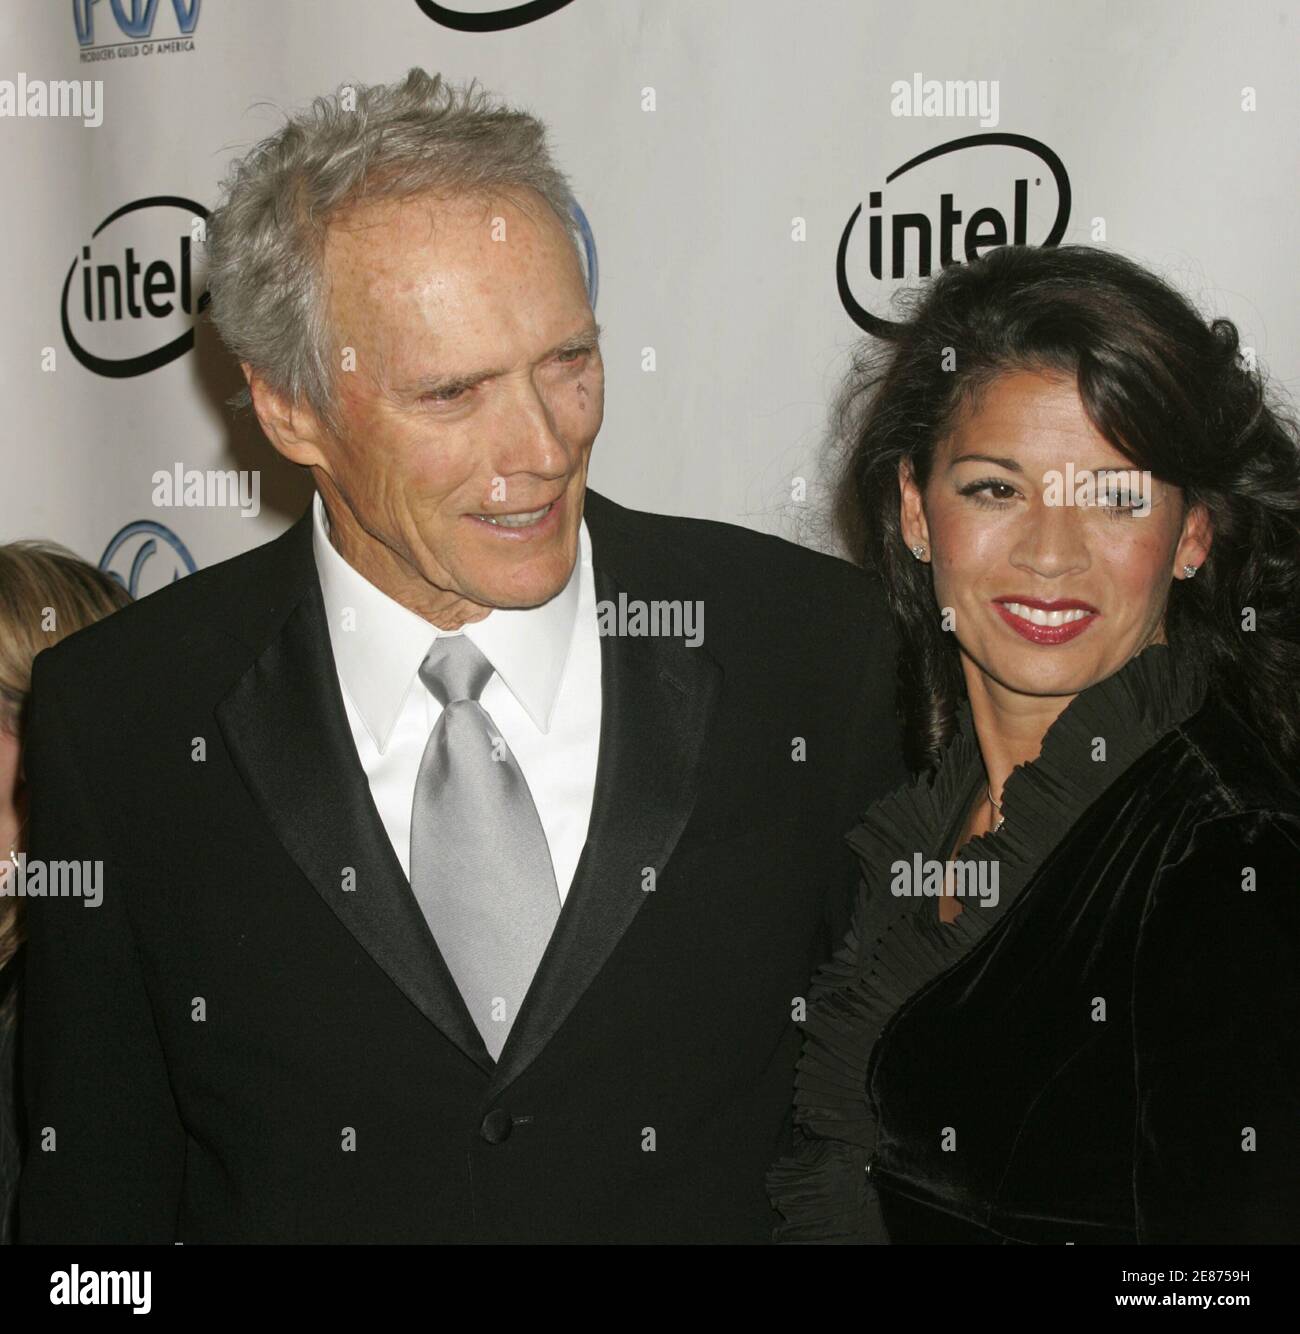 Actor, producer and director Clint Eastwood (L) and wife Dina Ruiz pose as they arrive at the 2006 Producers Guild Awards in Los Angeles, California January 22, 2006. Eastwood is to receive The Milestone Award at the ceremony. Stock Photo